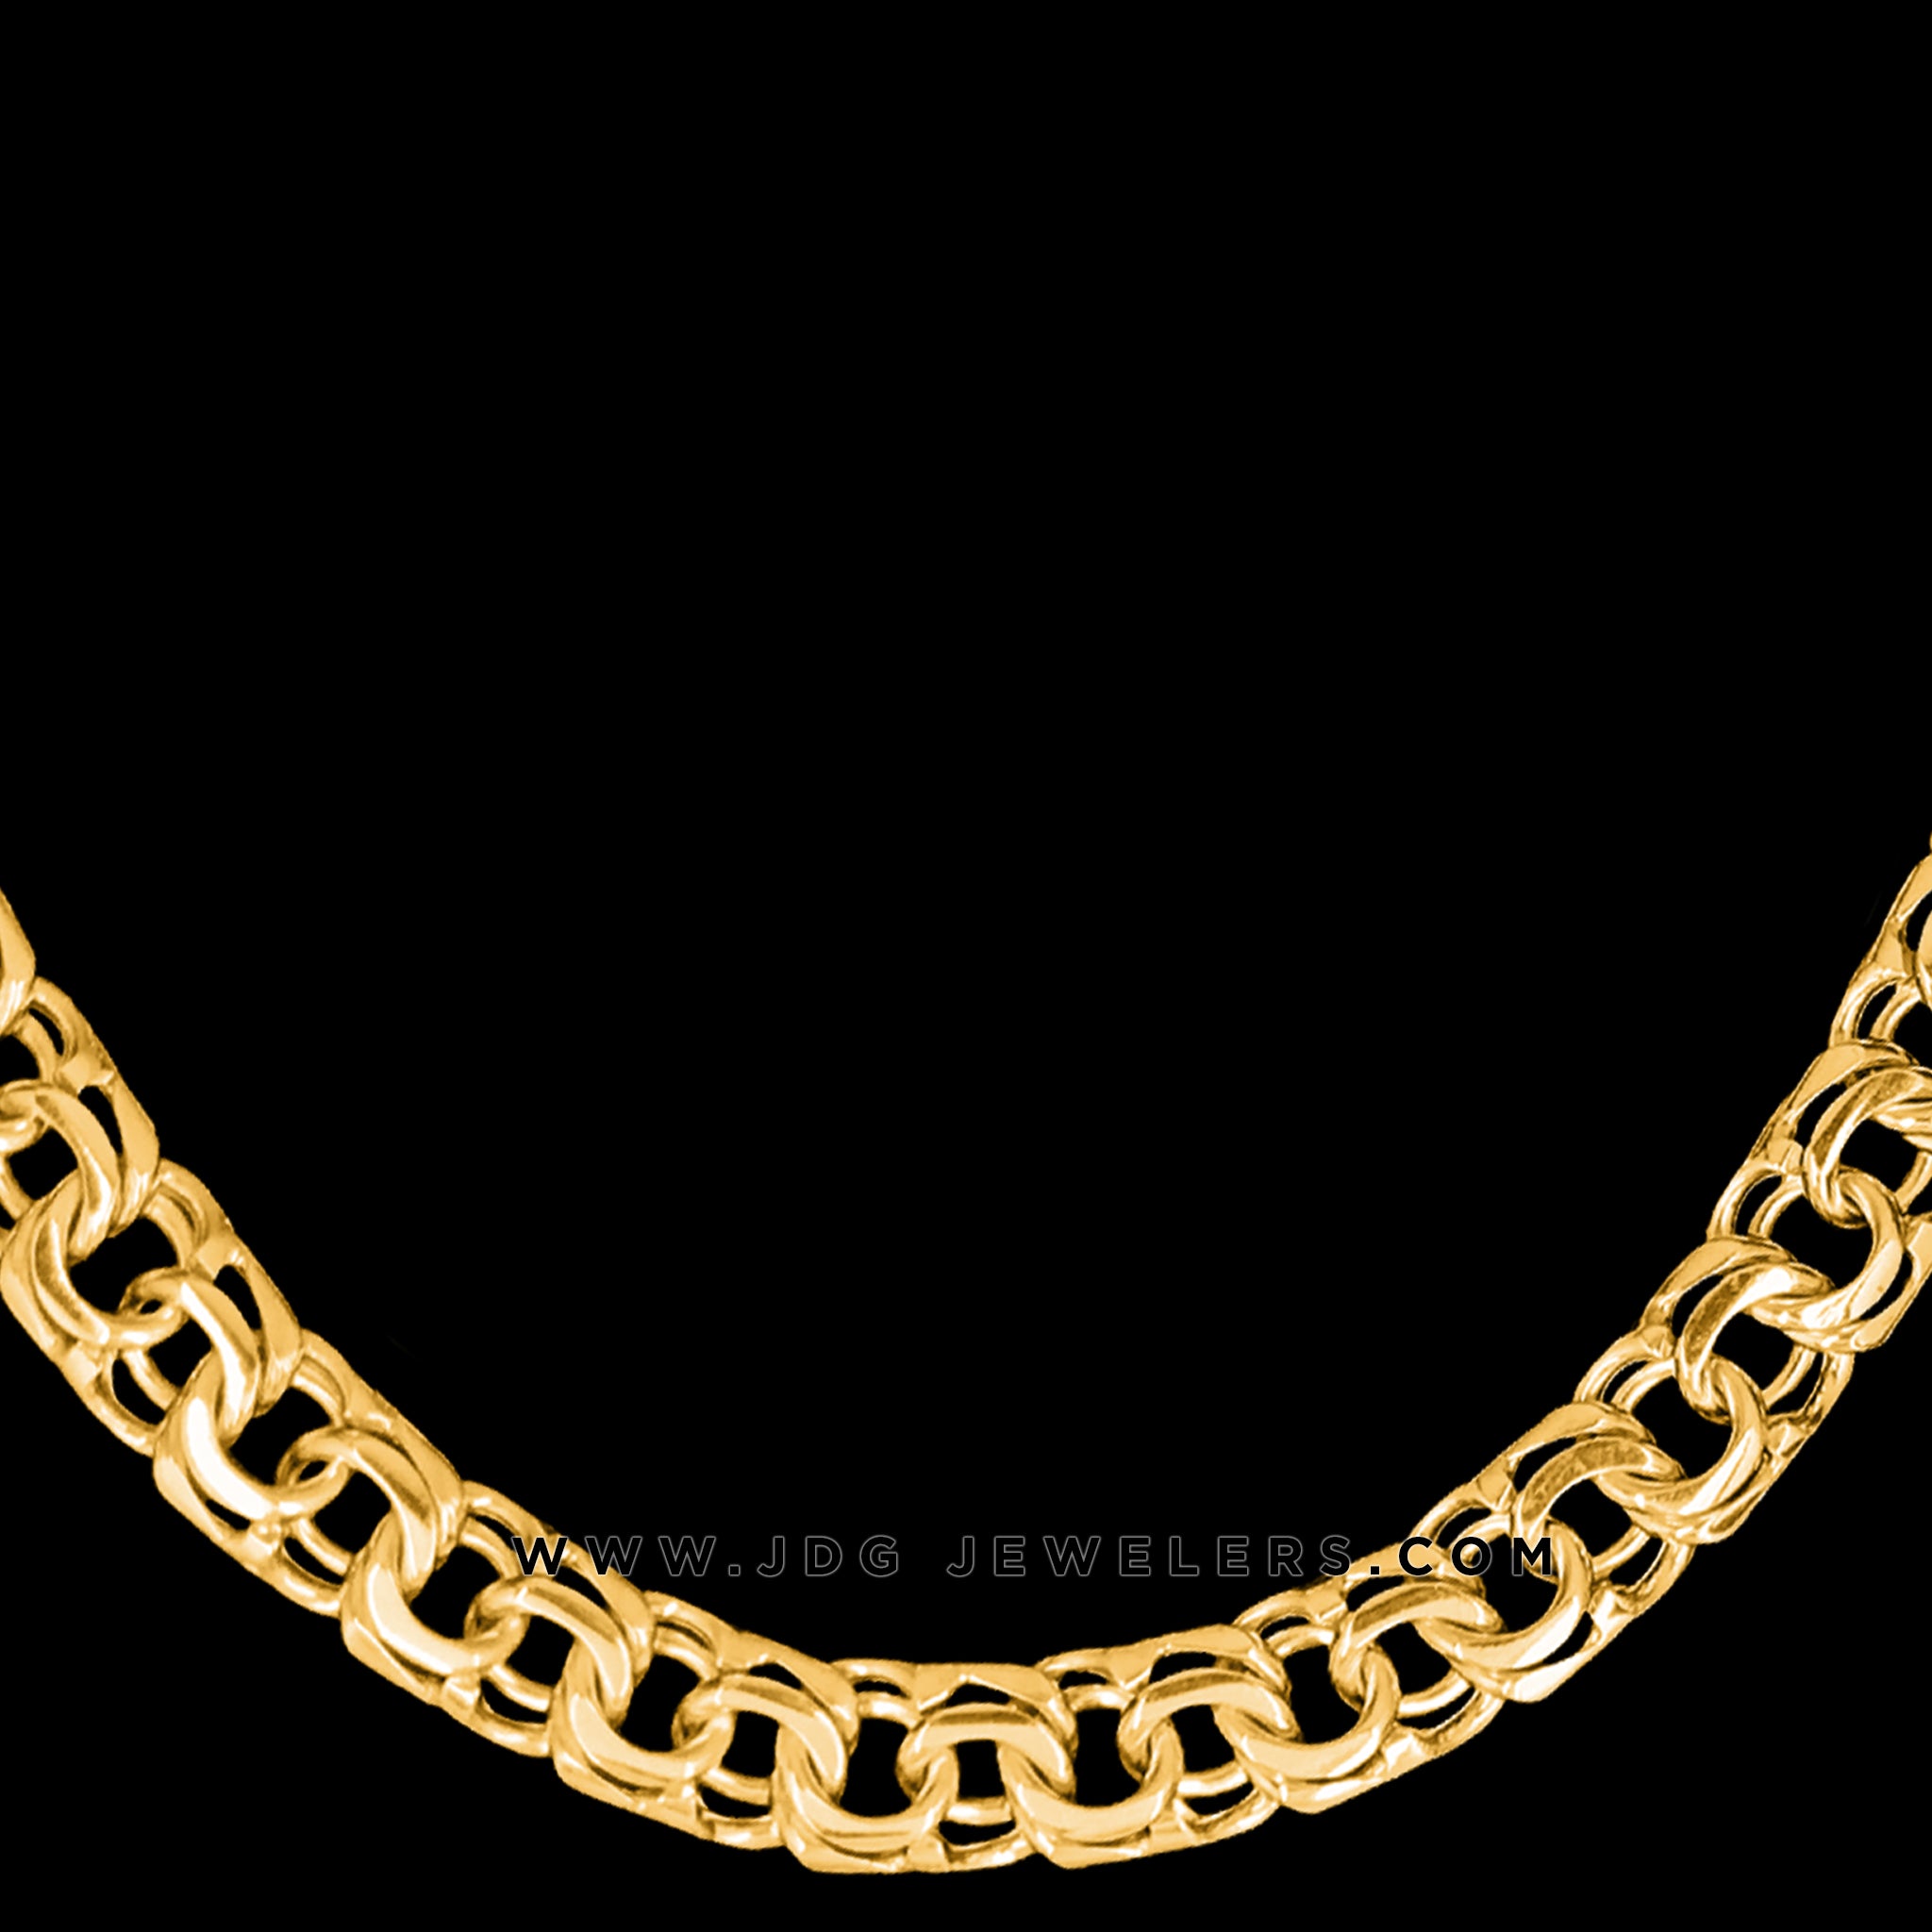 250.0 GR Chino Link Chain with FREE Initials